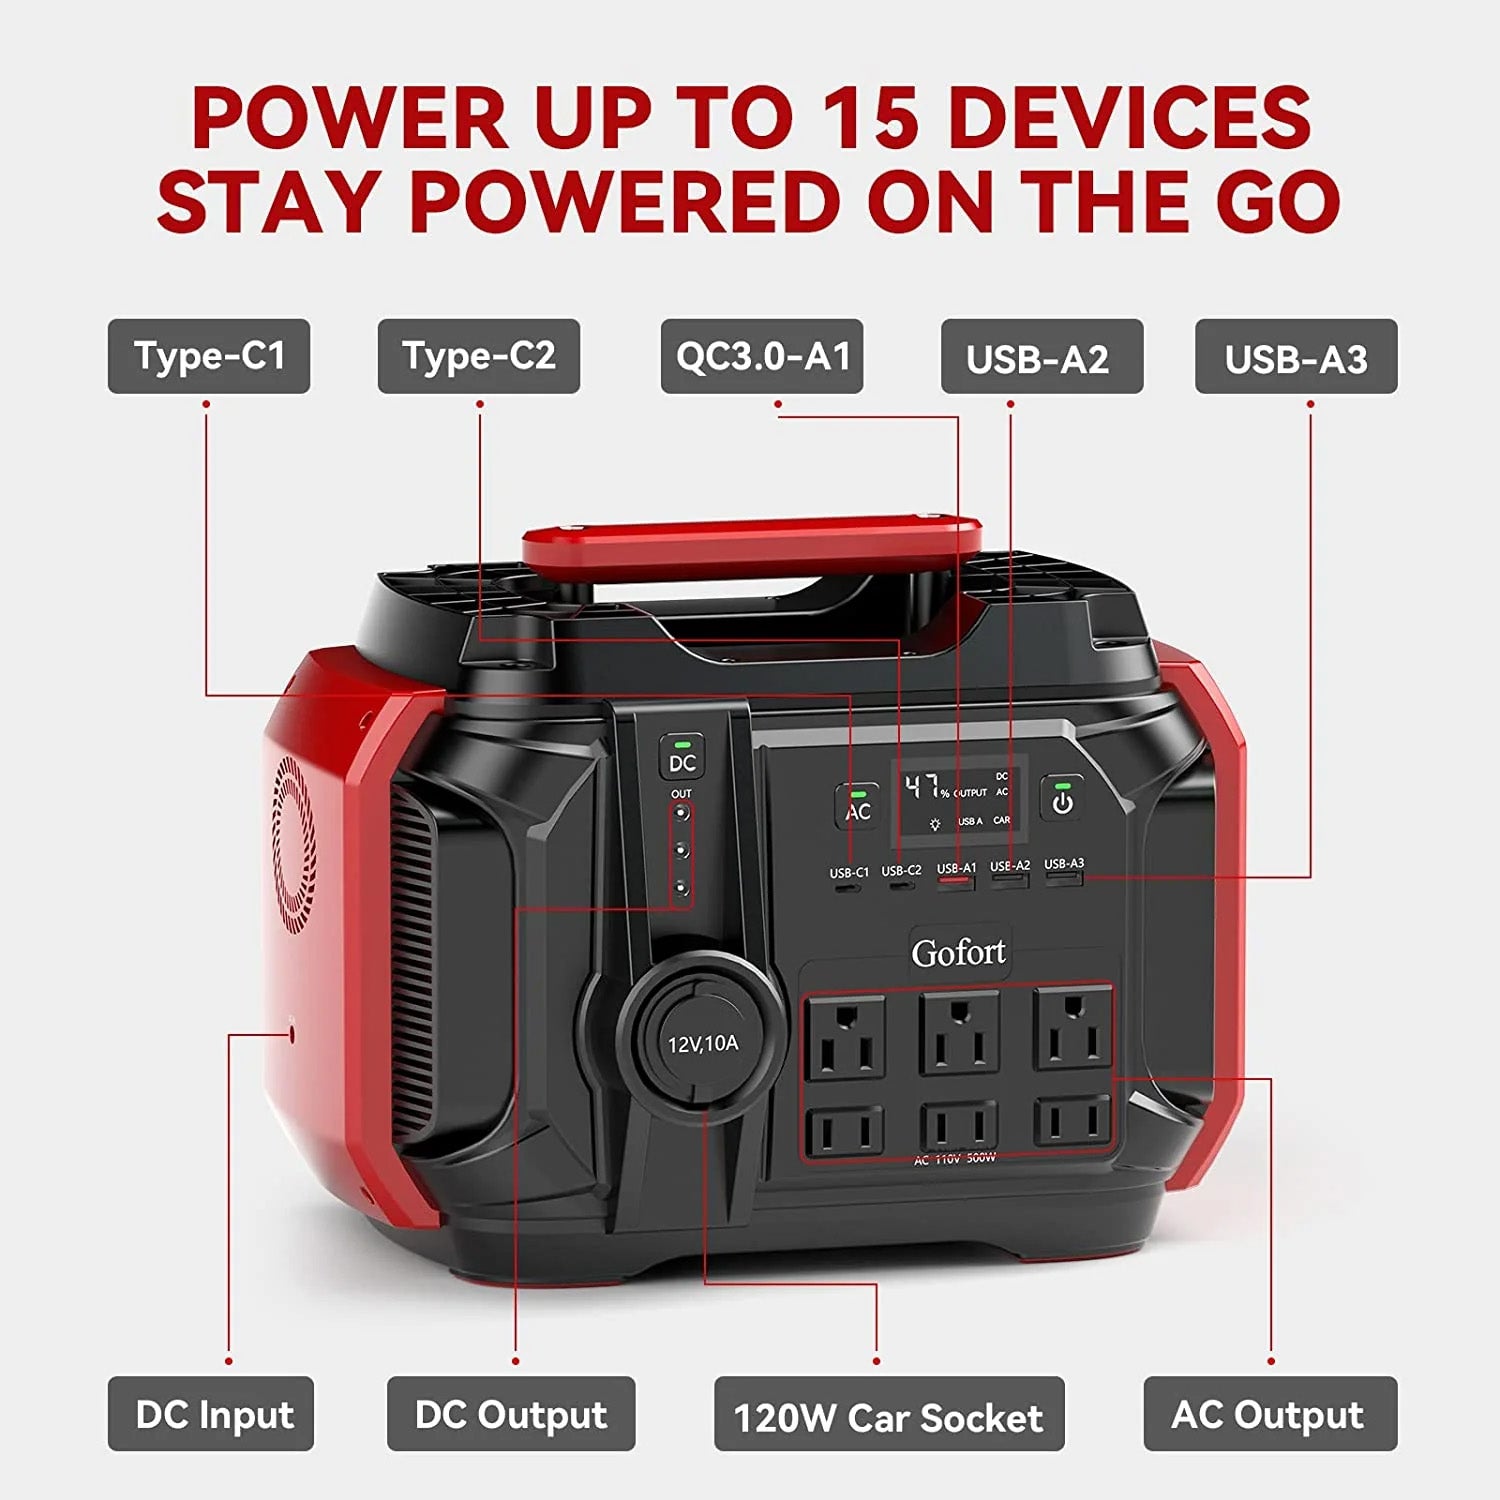 Power Up To 15 Devices With The Gofort A501